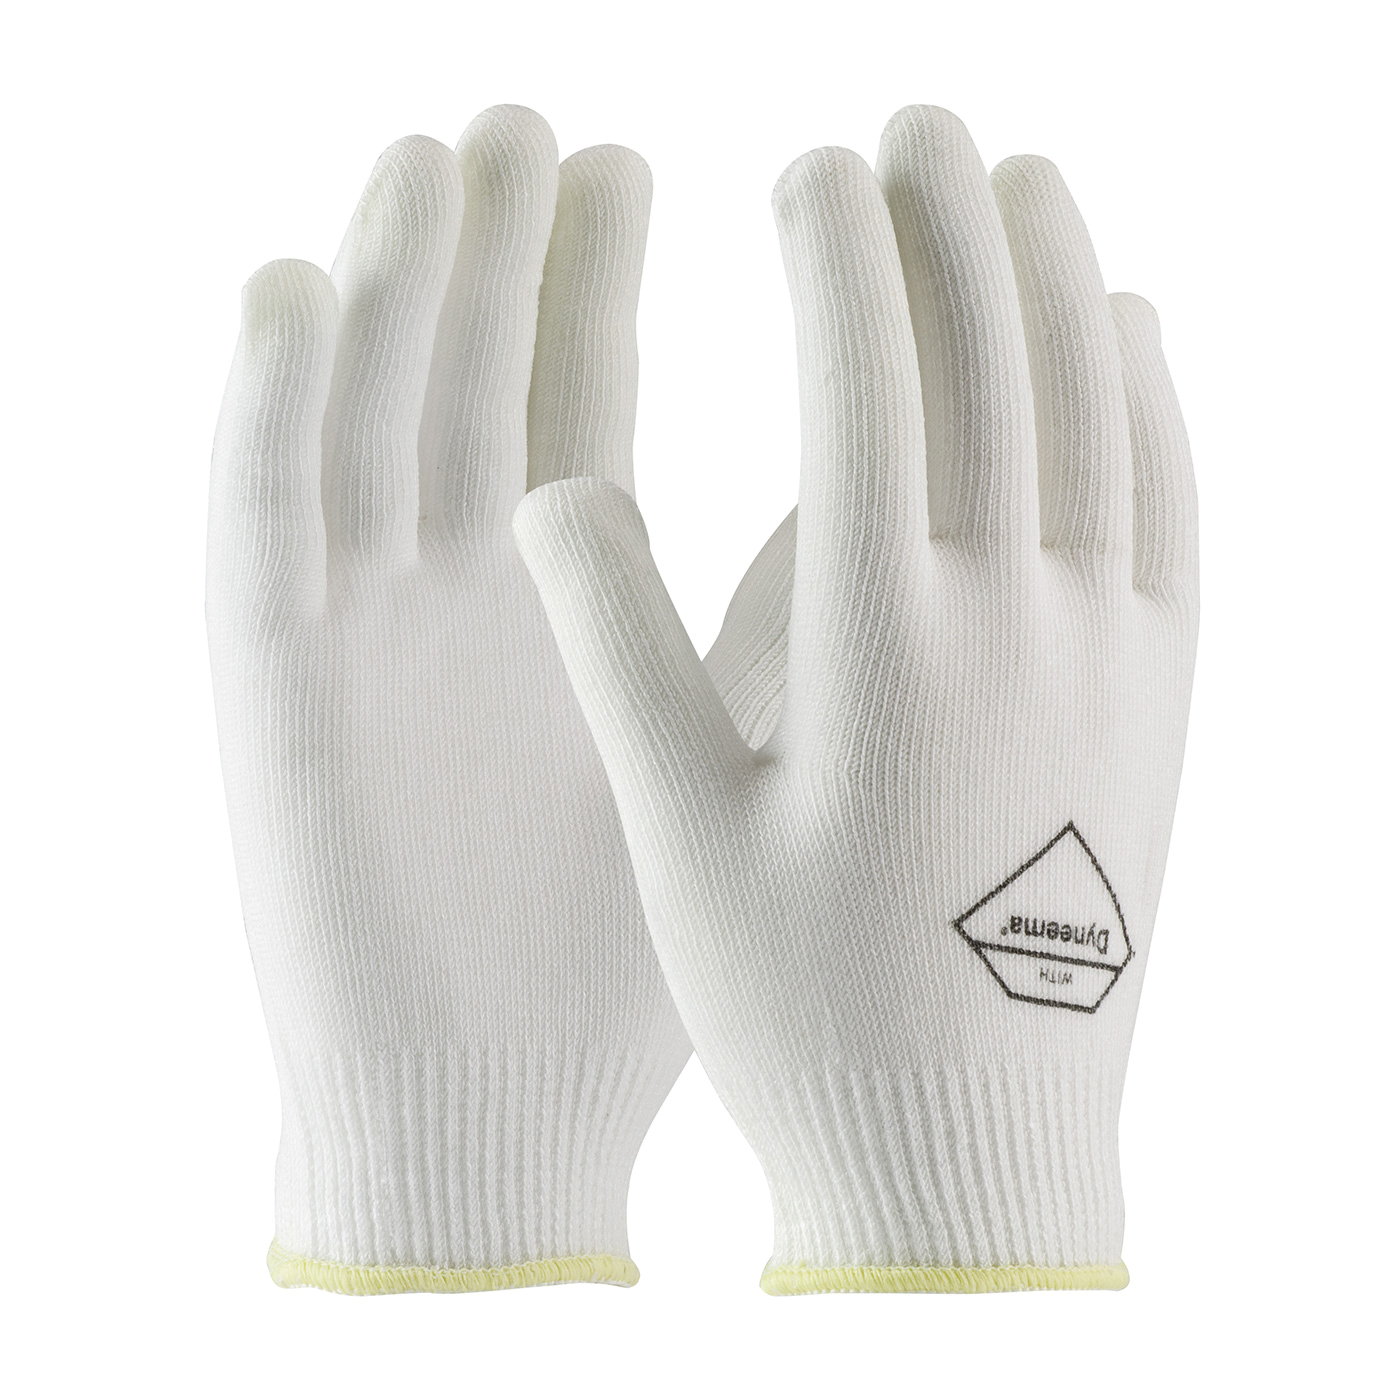 PIP® Kut-Gard® 17-DL200/XS Lightweight Unisex Cut Resistant Gloves, XS, Uncoated Coating, Dyneema®/Lycra®, Continuous Knit Wrist Cuff, Resists: Cut, ANSI Cut-Resistance Level: A2, Paired Hand